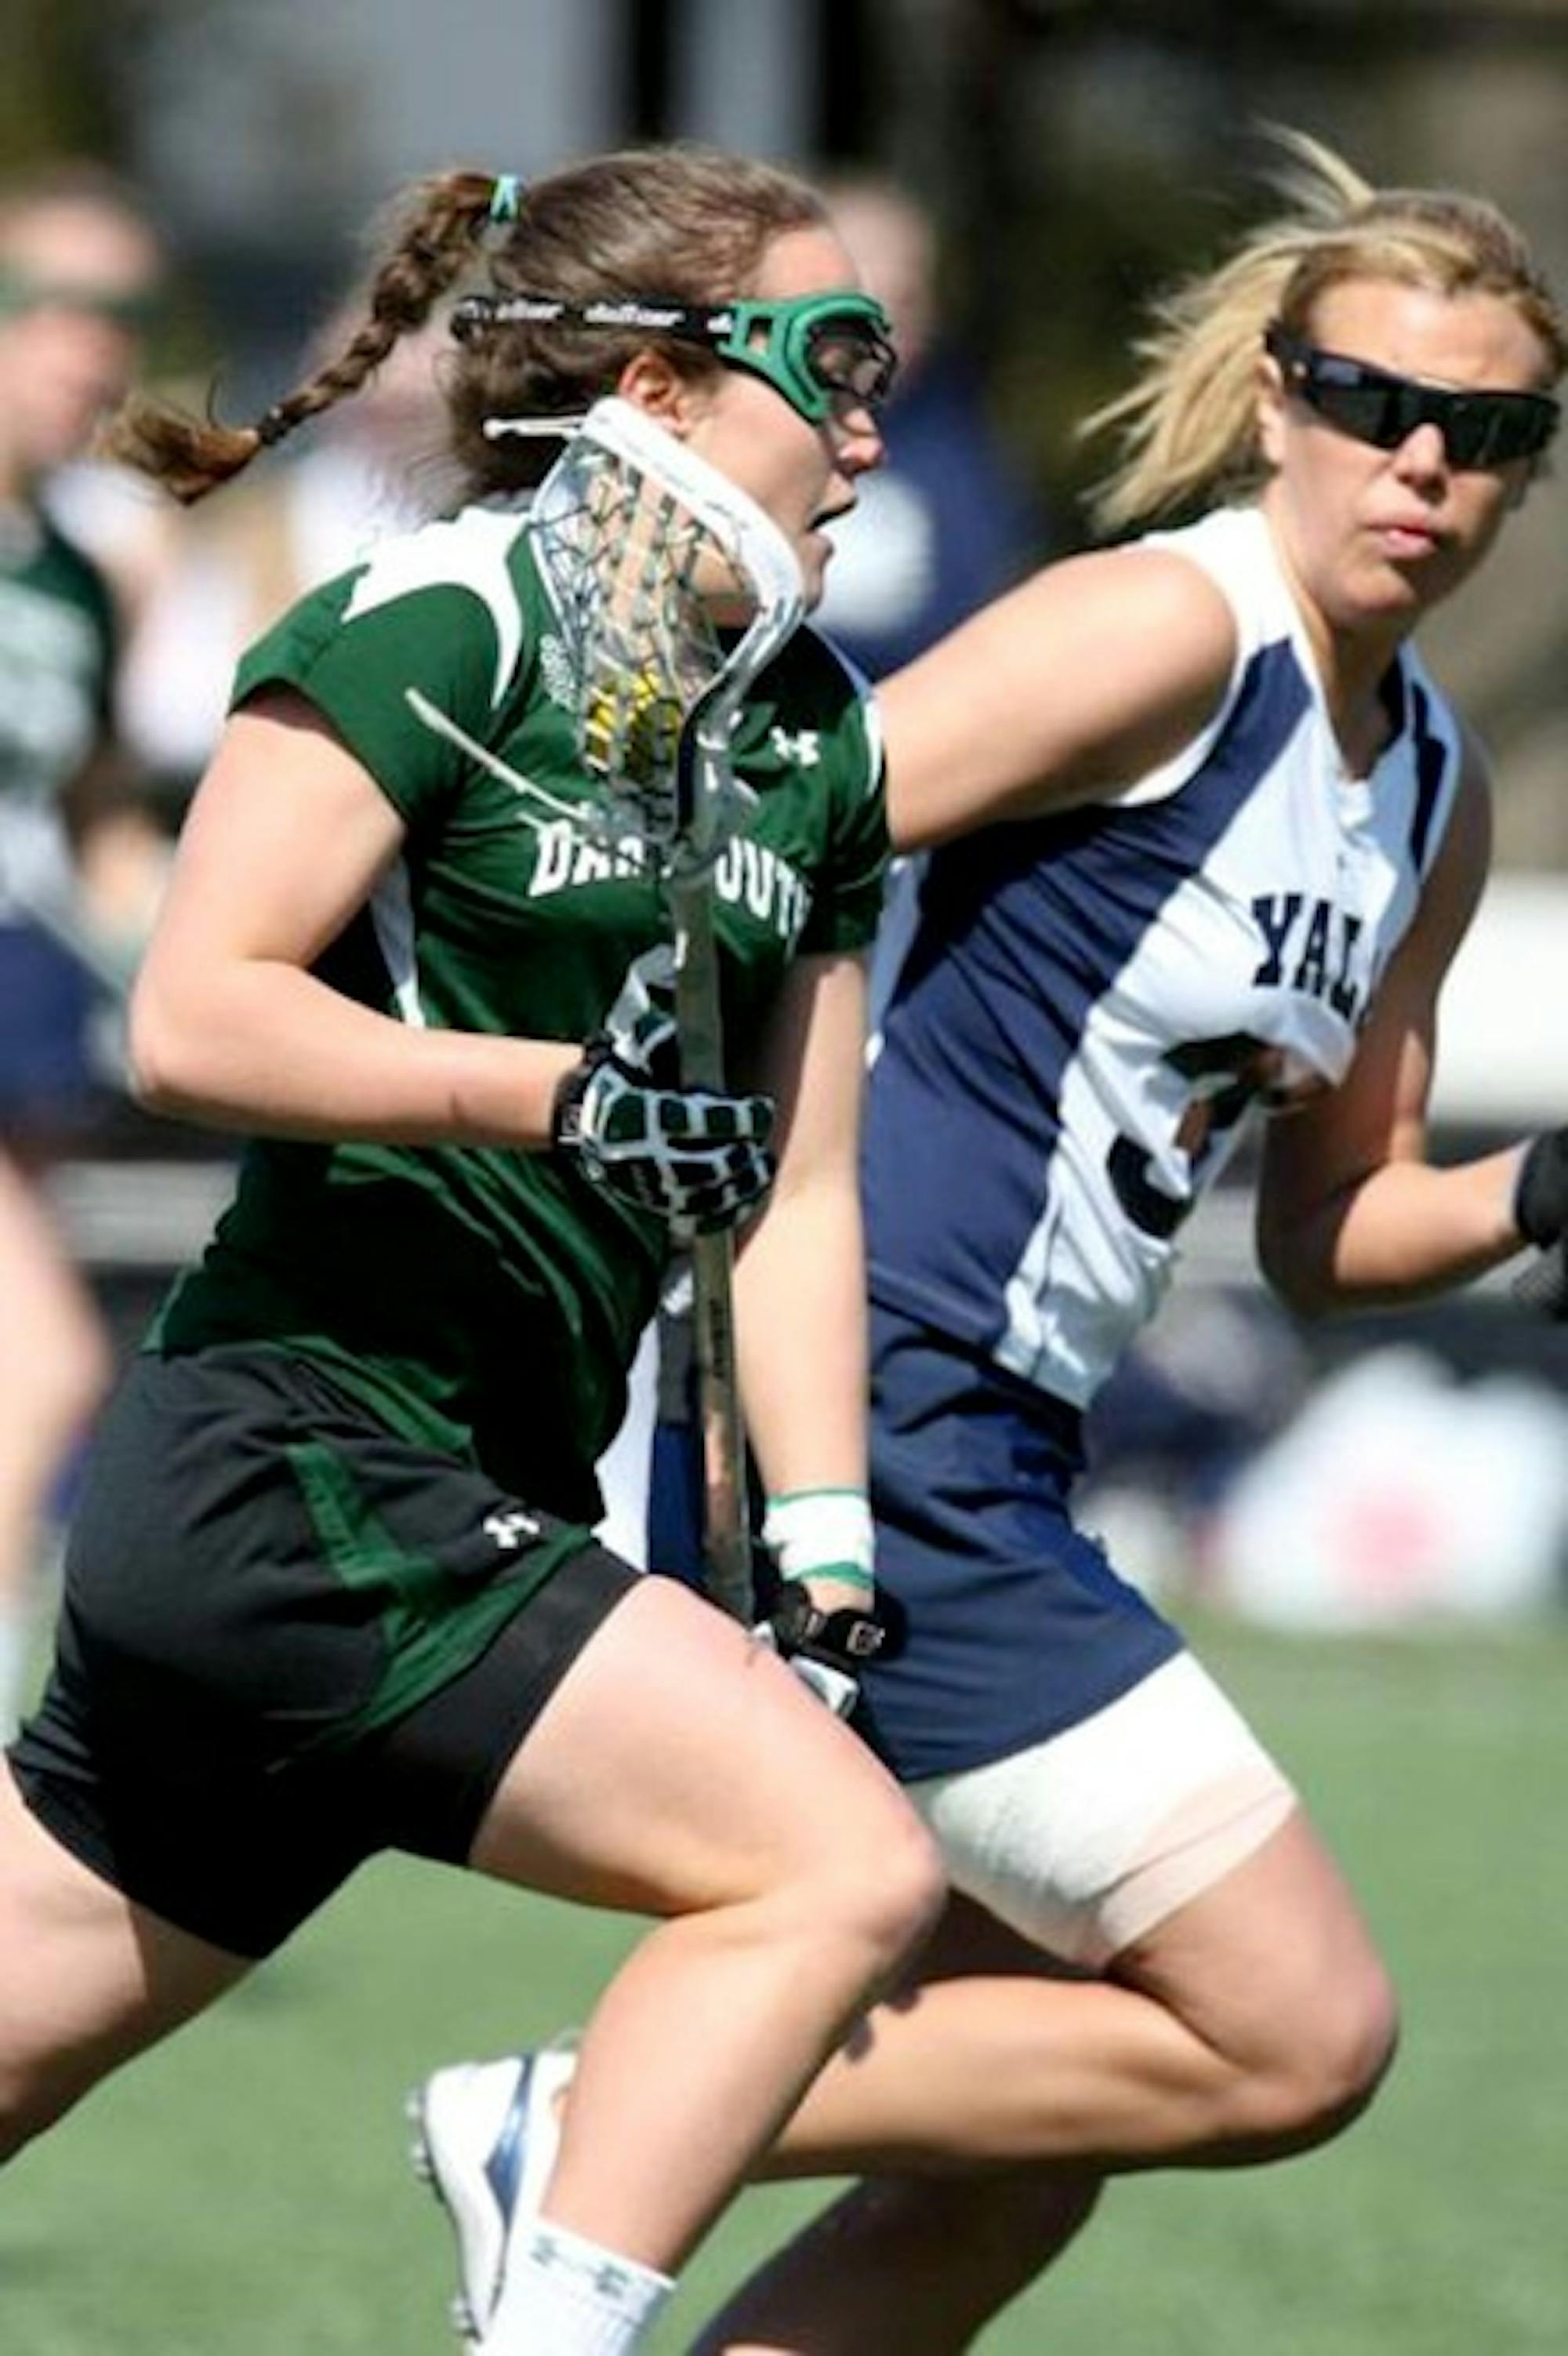 Colleen Olsen '10, left, has been named to the U.S. Lacrosse Developmental Squad along with teammate Julie Wadland '10.